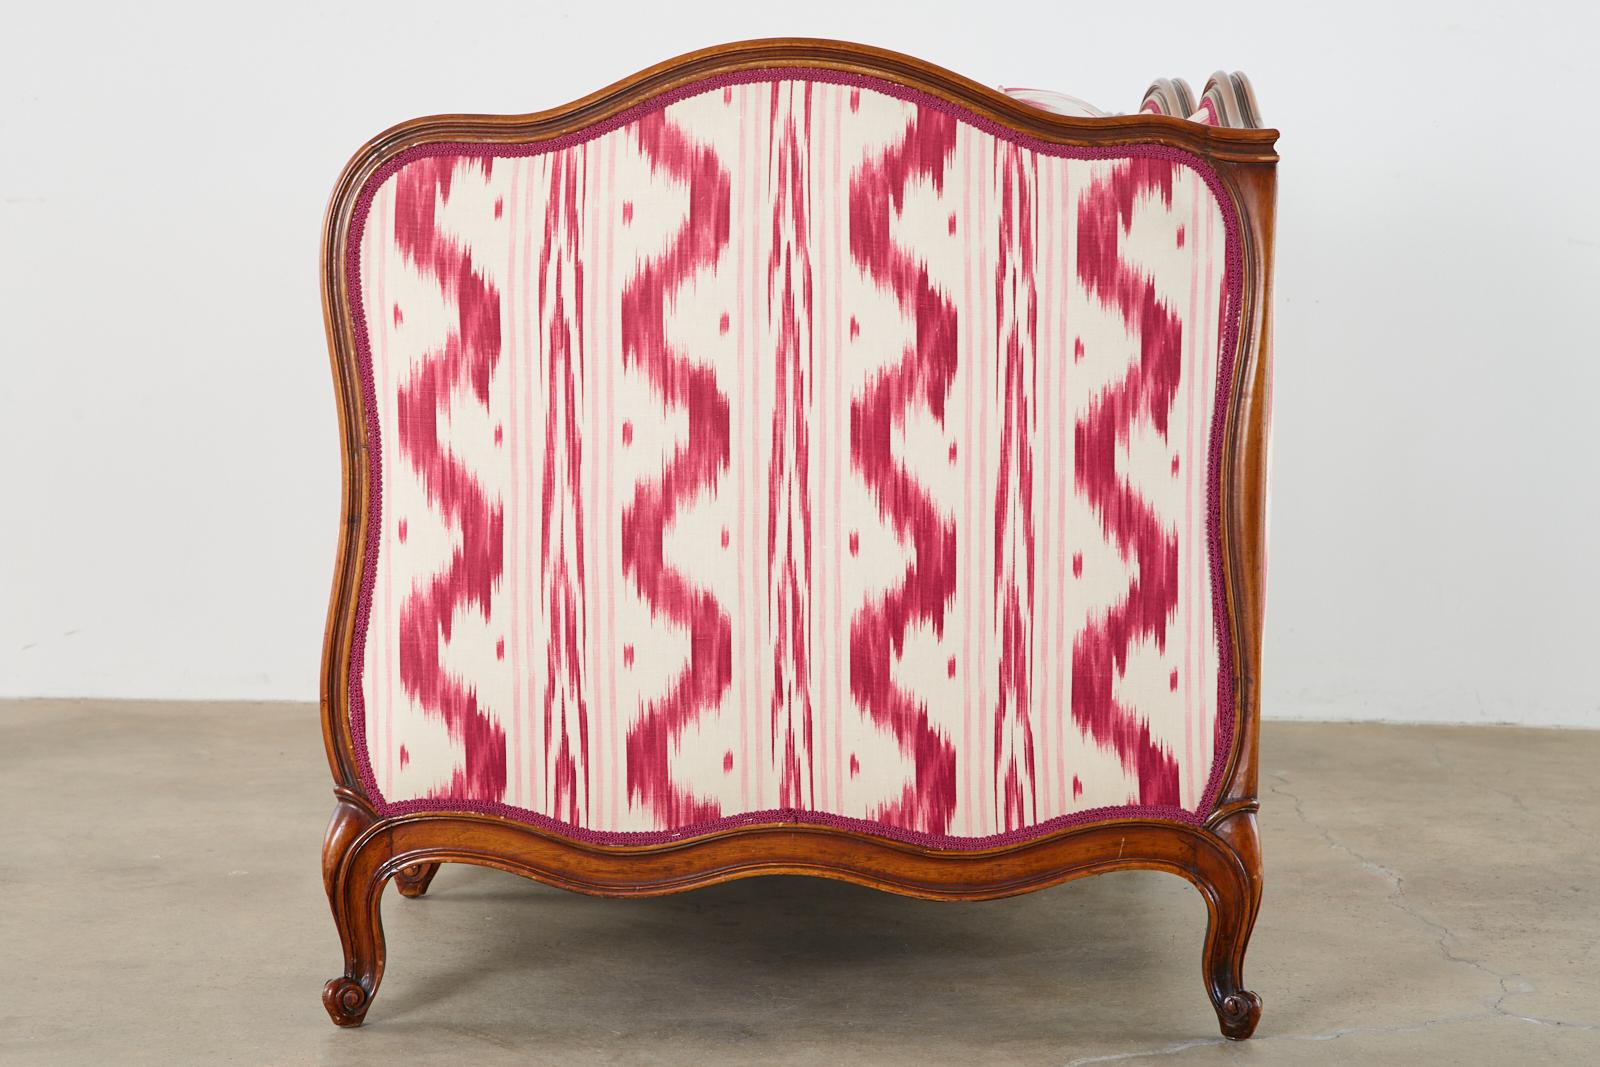 Fabric French Provincial Serpentine Canape Settee Pierre Frey Toile Ikat